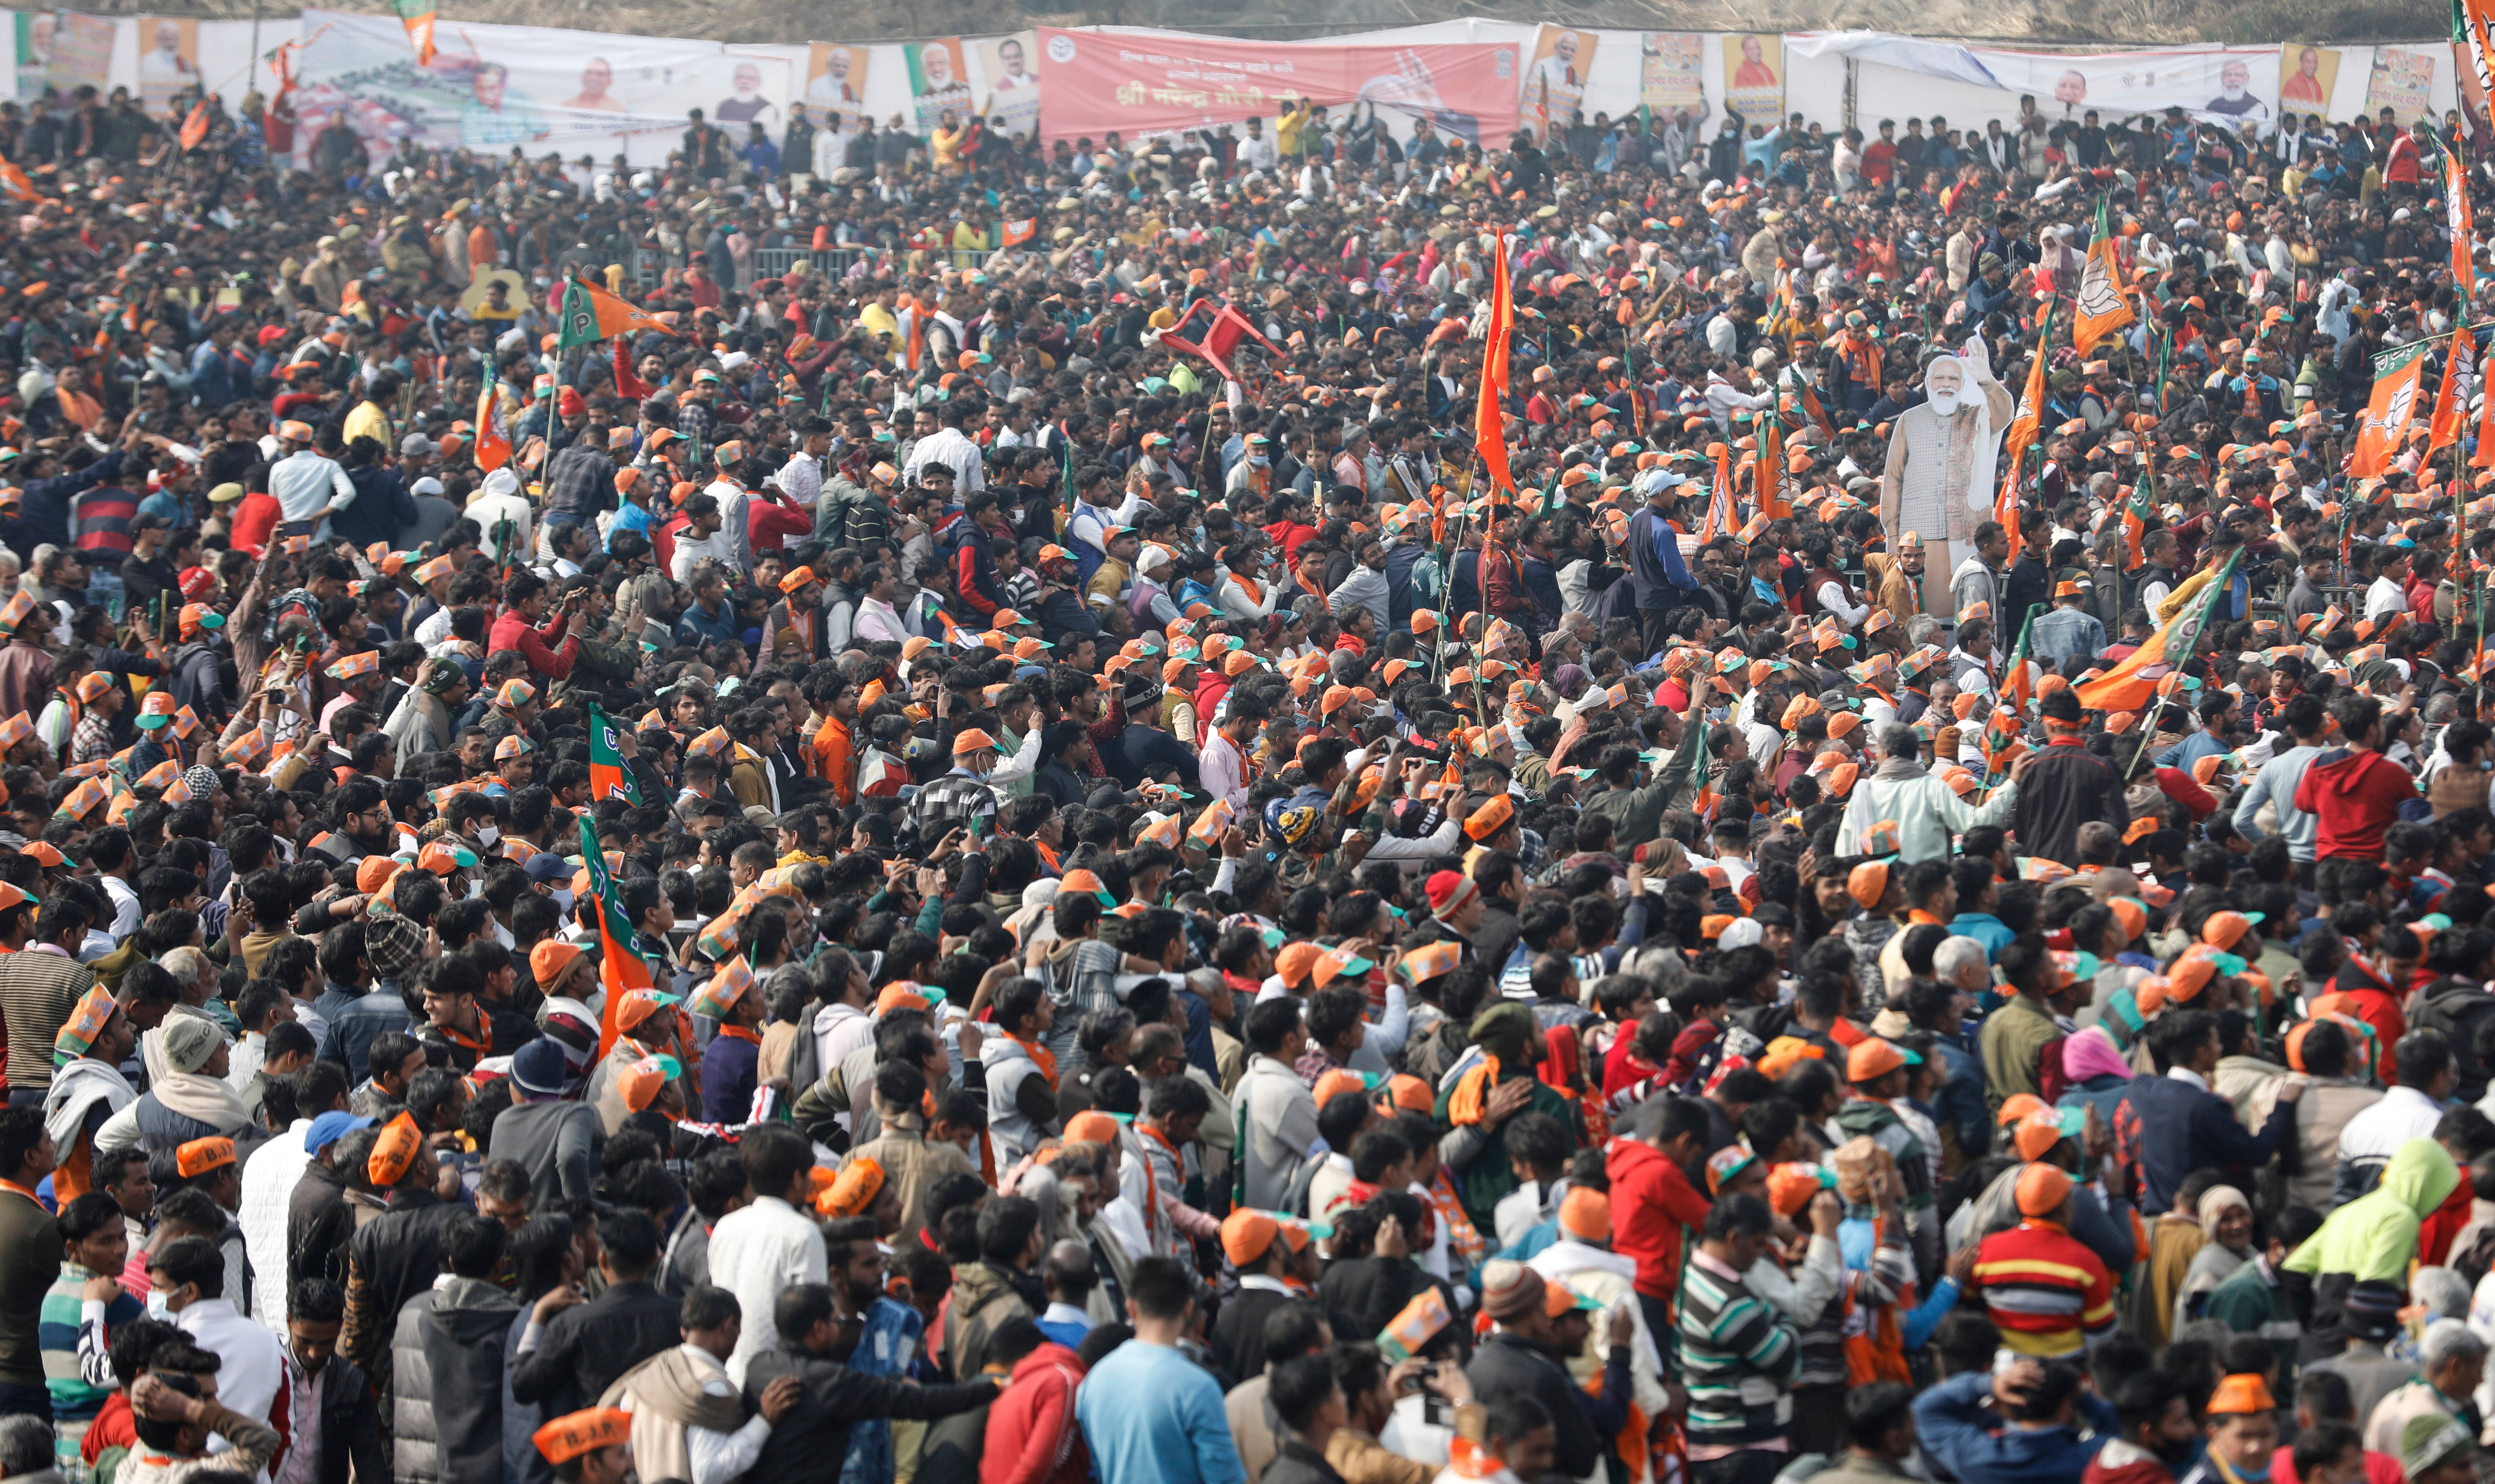 A crowd of supporters gather to listen to the Indian prime minister, Narendra Modi, in Meerut, Uttar Pradesh on 2 January